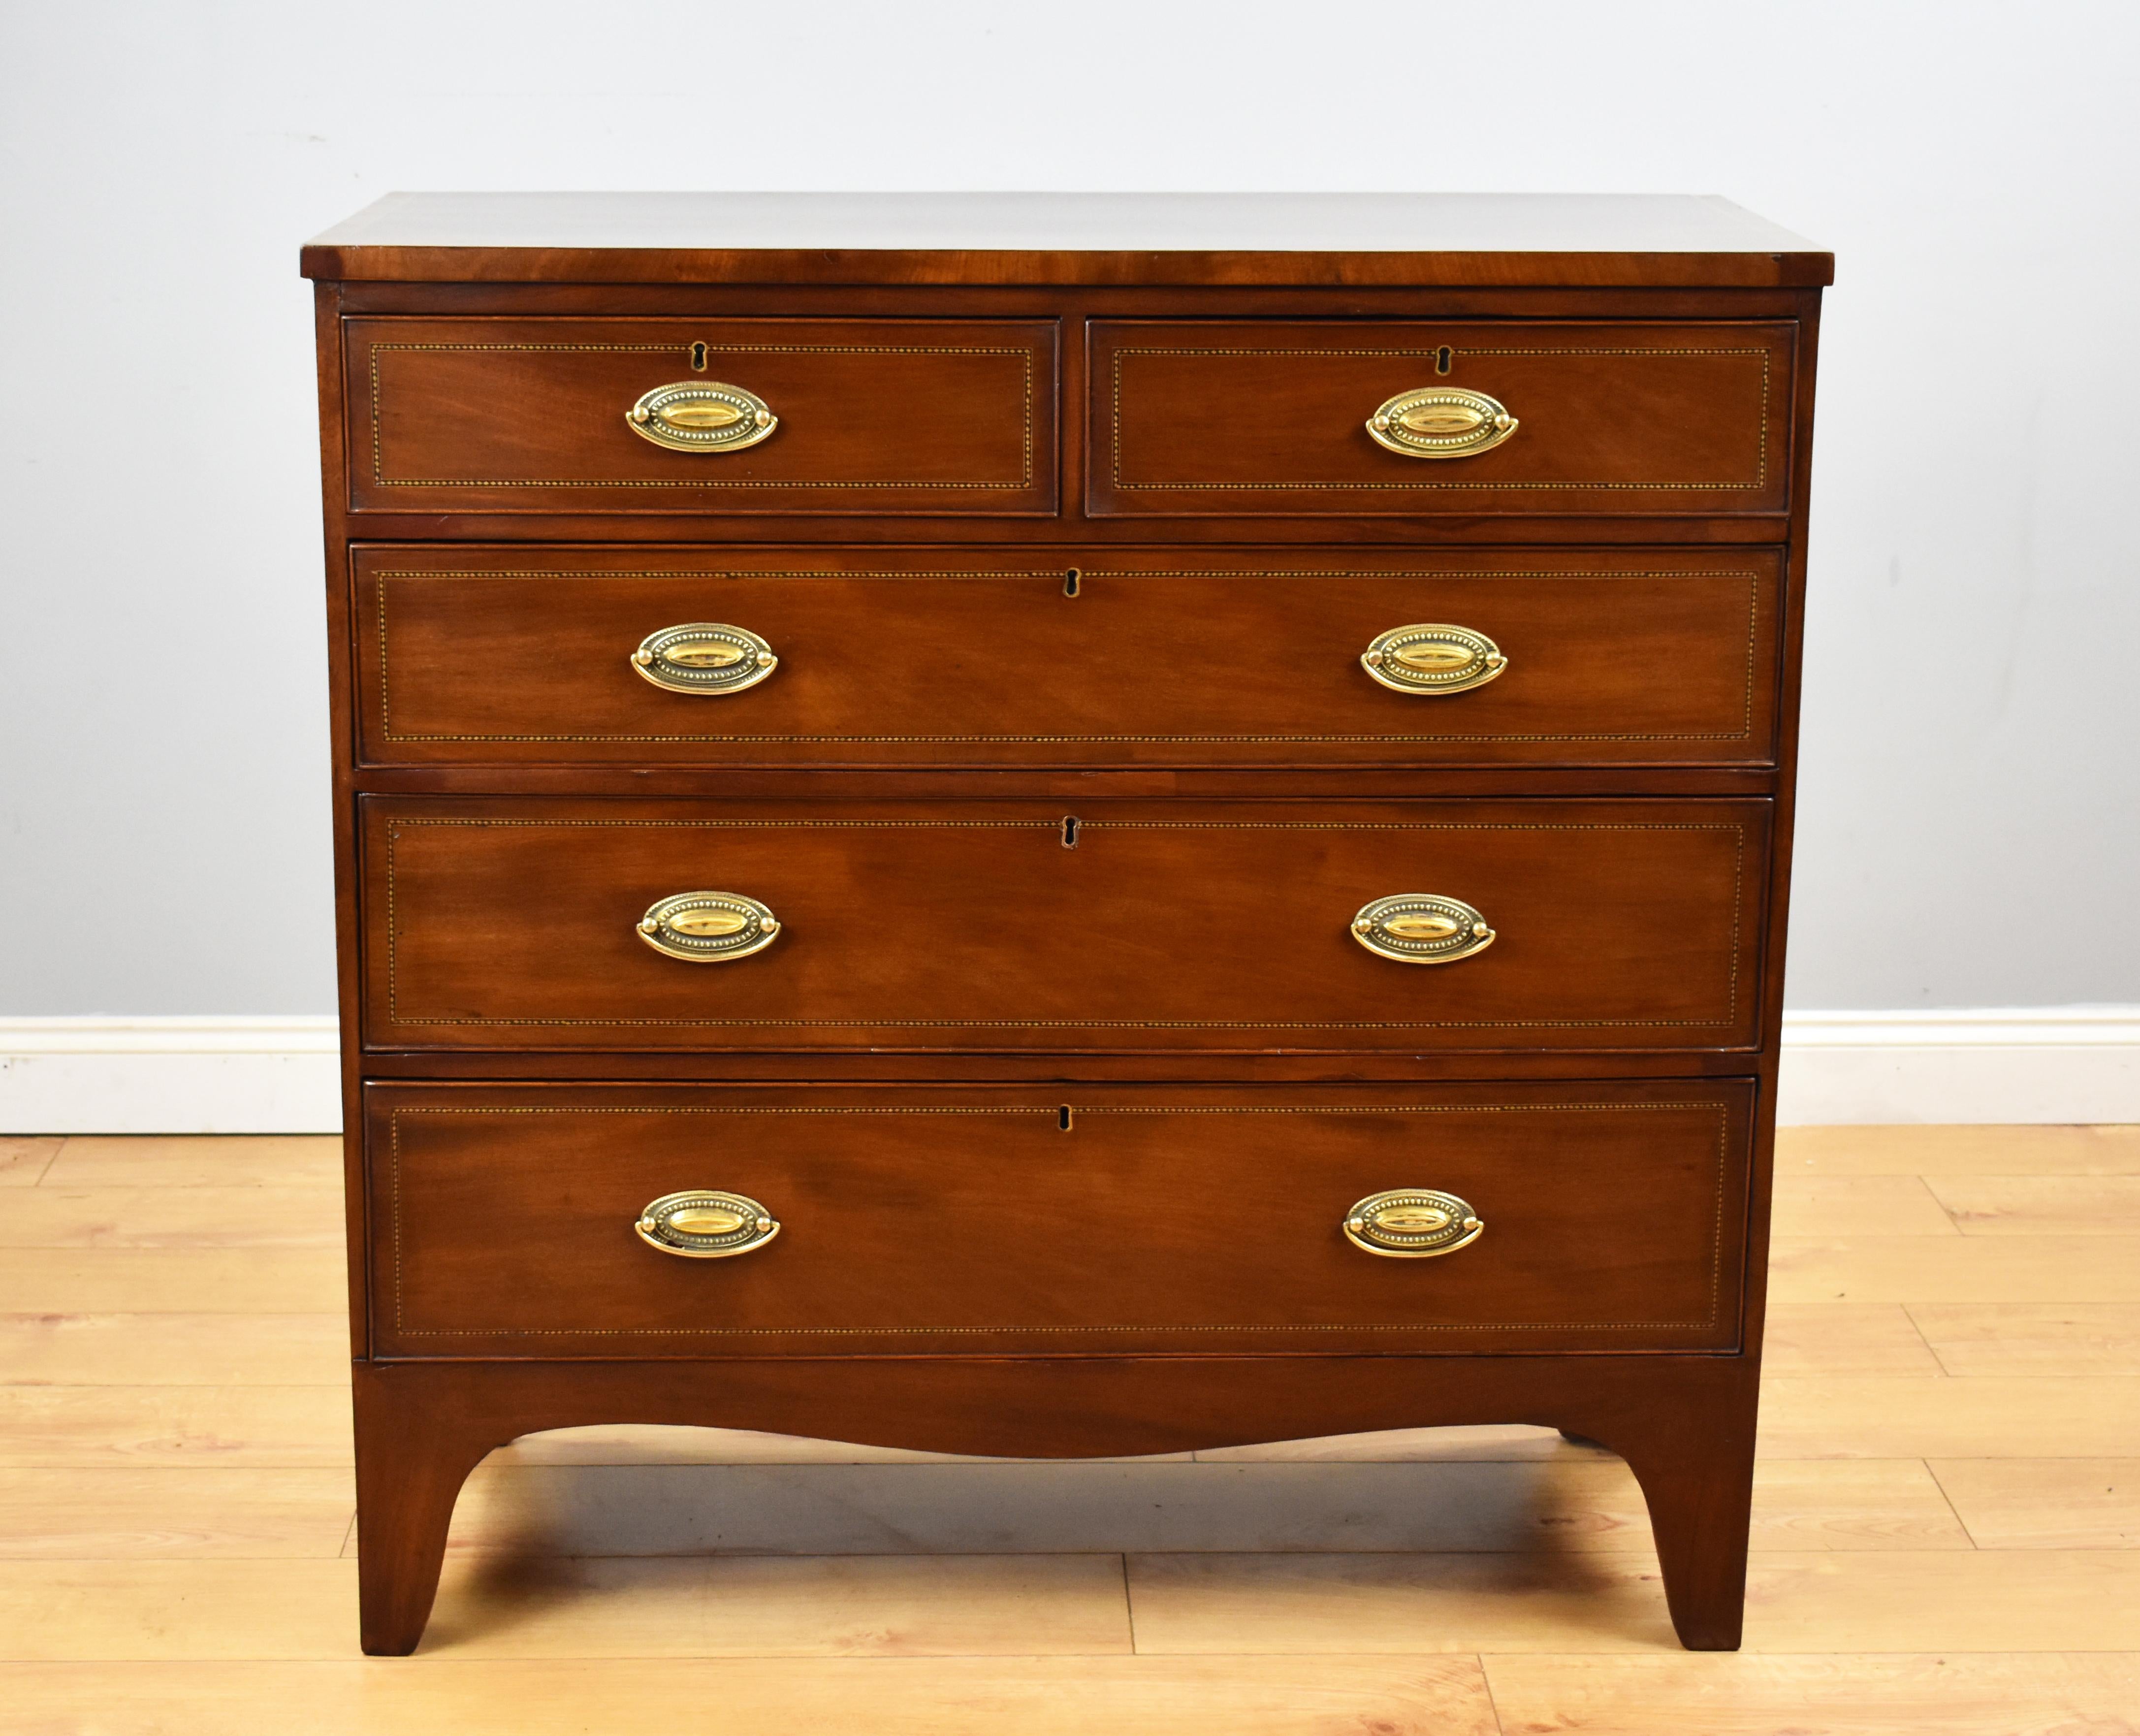 For sale is an antique mahogany inlaid chest of drawers, having an inlaid and cross banded top above an arrangement of five graduated drawers. The chest remains in good condition for its age. 

Measures: Width: 41.25